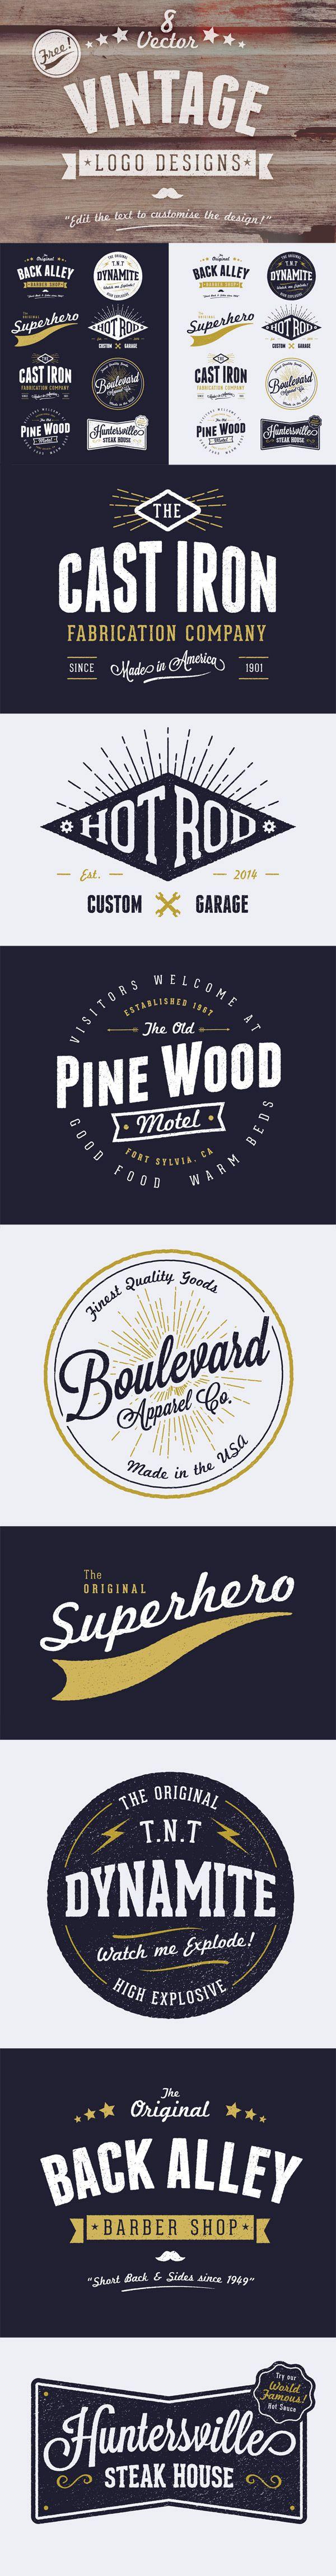 Old- Style Logo - Free Customizable Vector Vintage Style Logo Designs